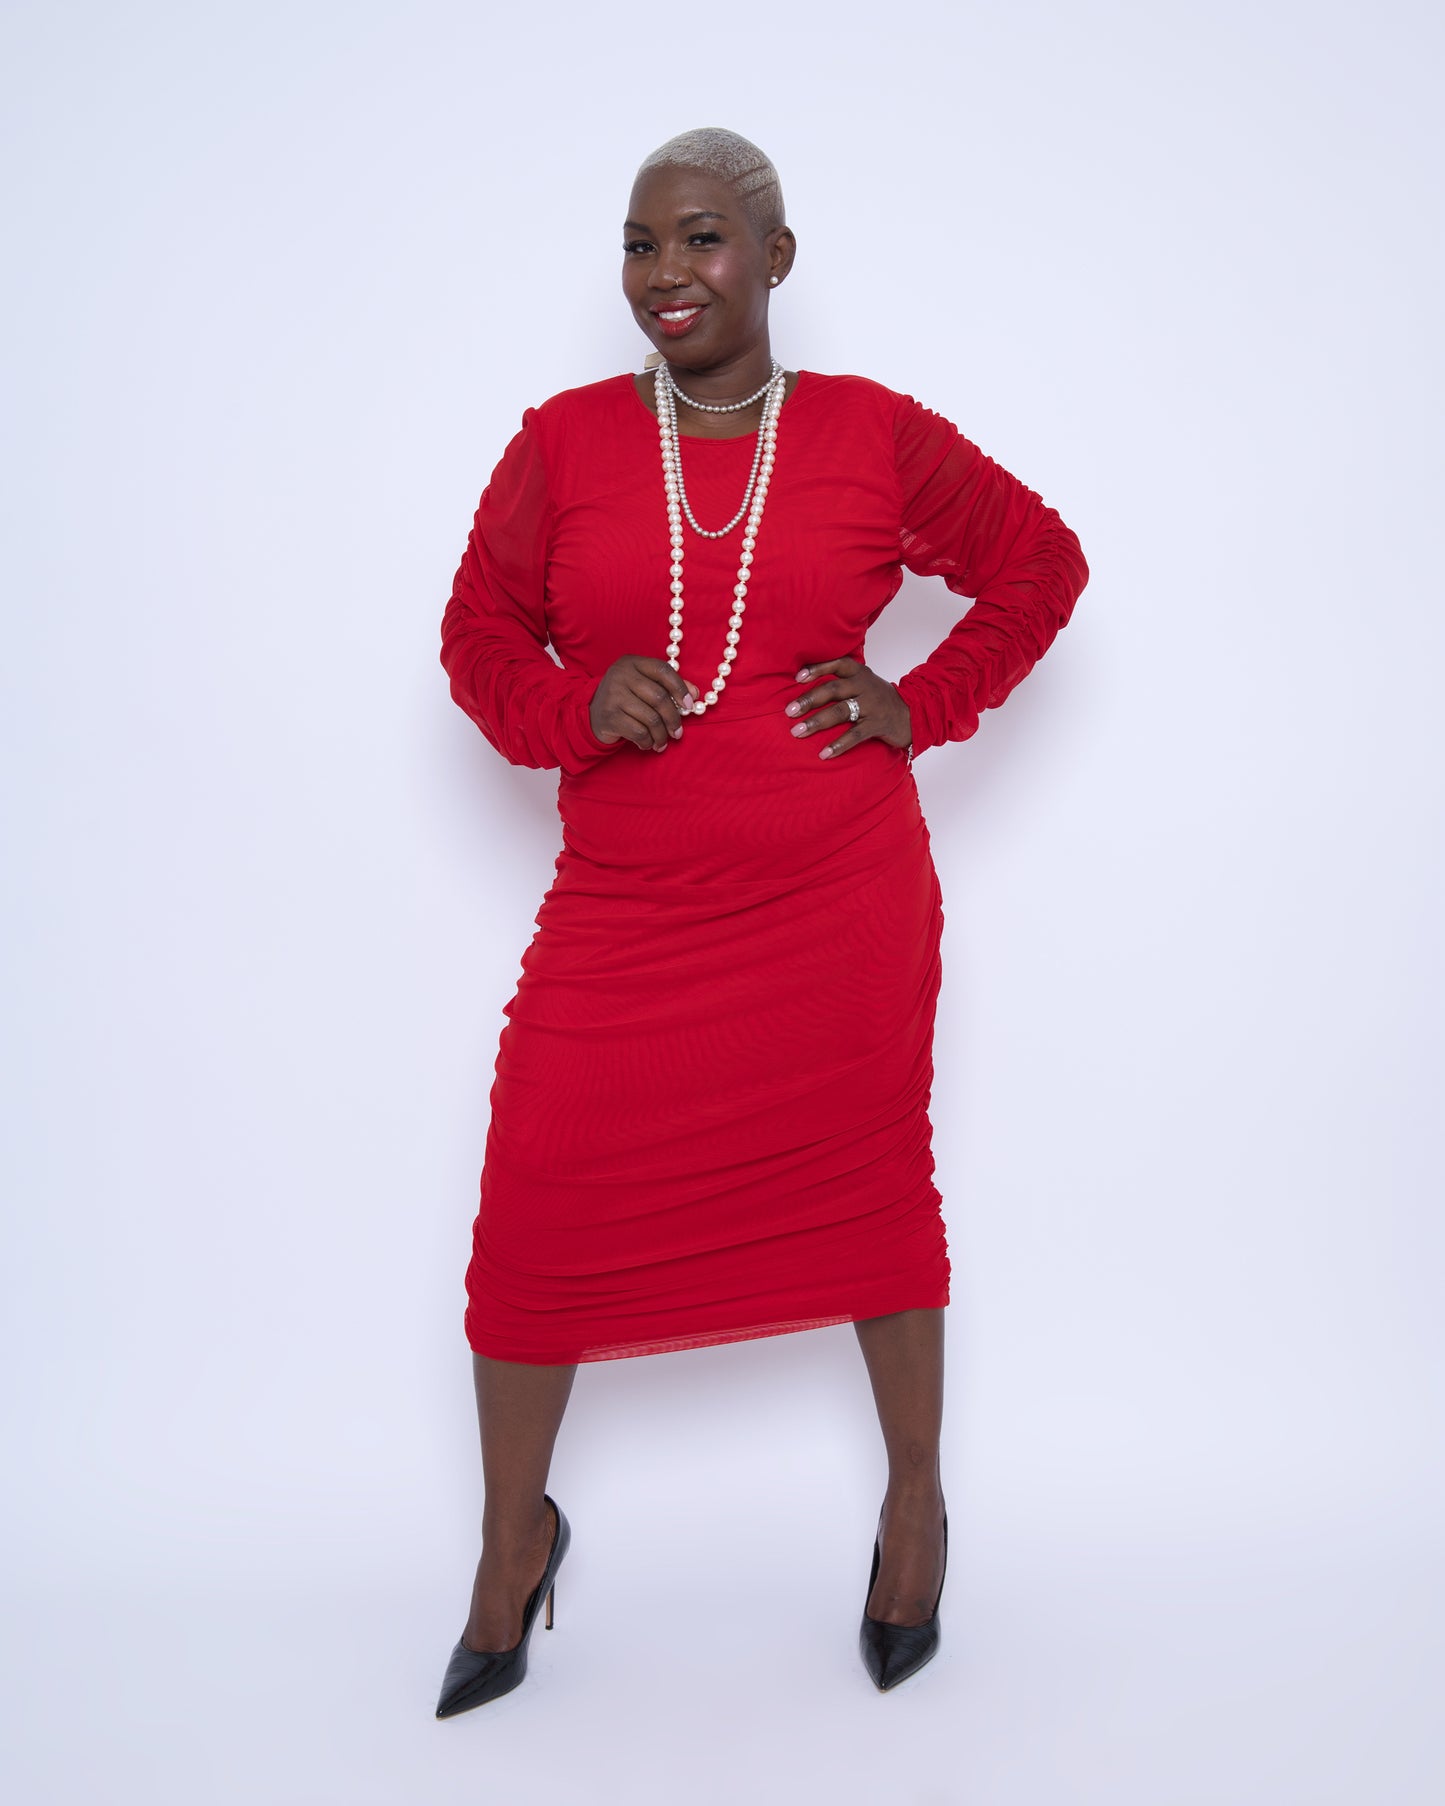 Women's Red Plus Size Boudicca Ruched Bodycon Midi Dress styled with pearl jewelry and black heels for a sophisticated, elegant ensemble.